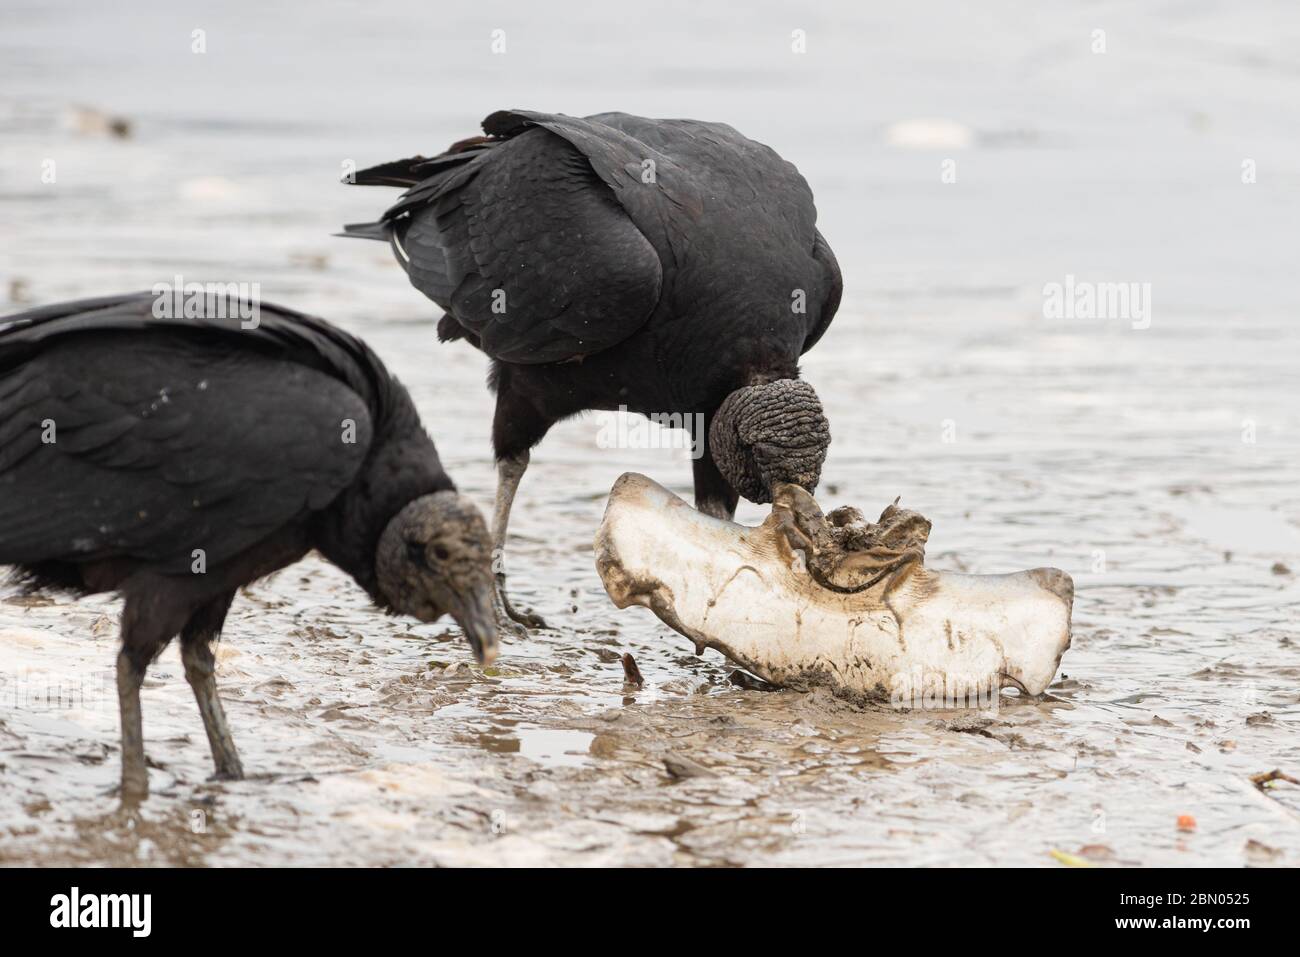 Black Vultures eating the carcass of a Hammerhead Shark caught by commercial fishermen, SE Brazil Stock Photo